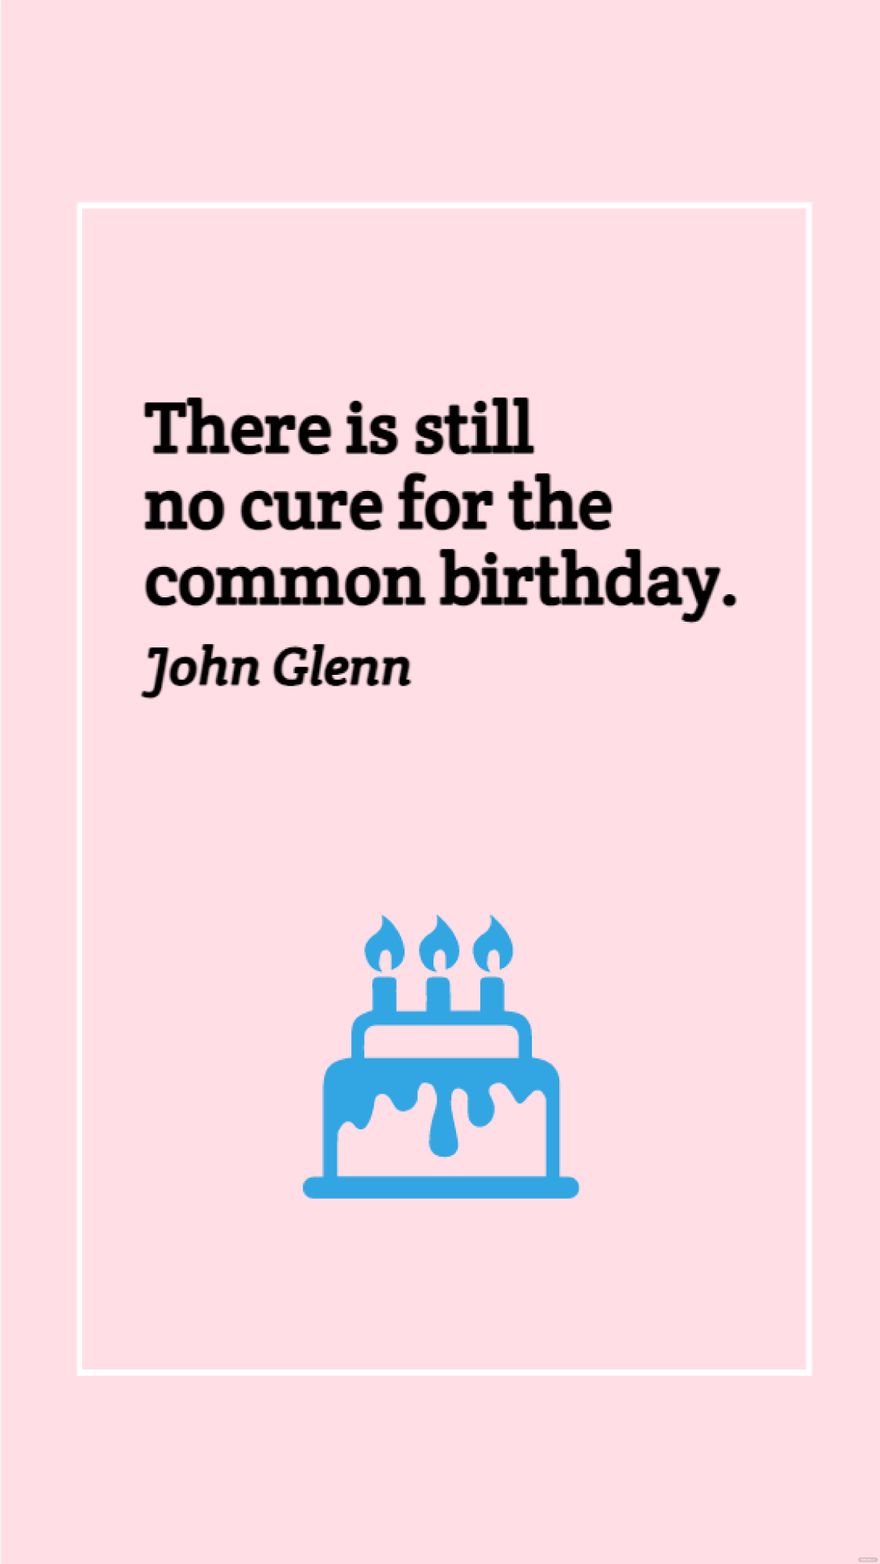 John Glenn - There is still no cure for the common birthday.